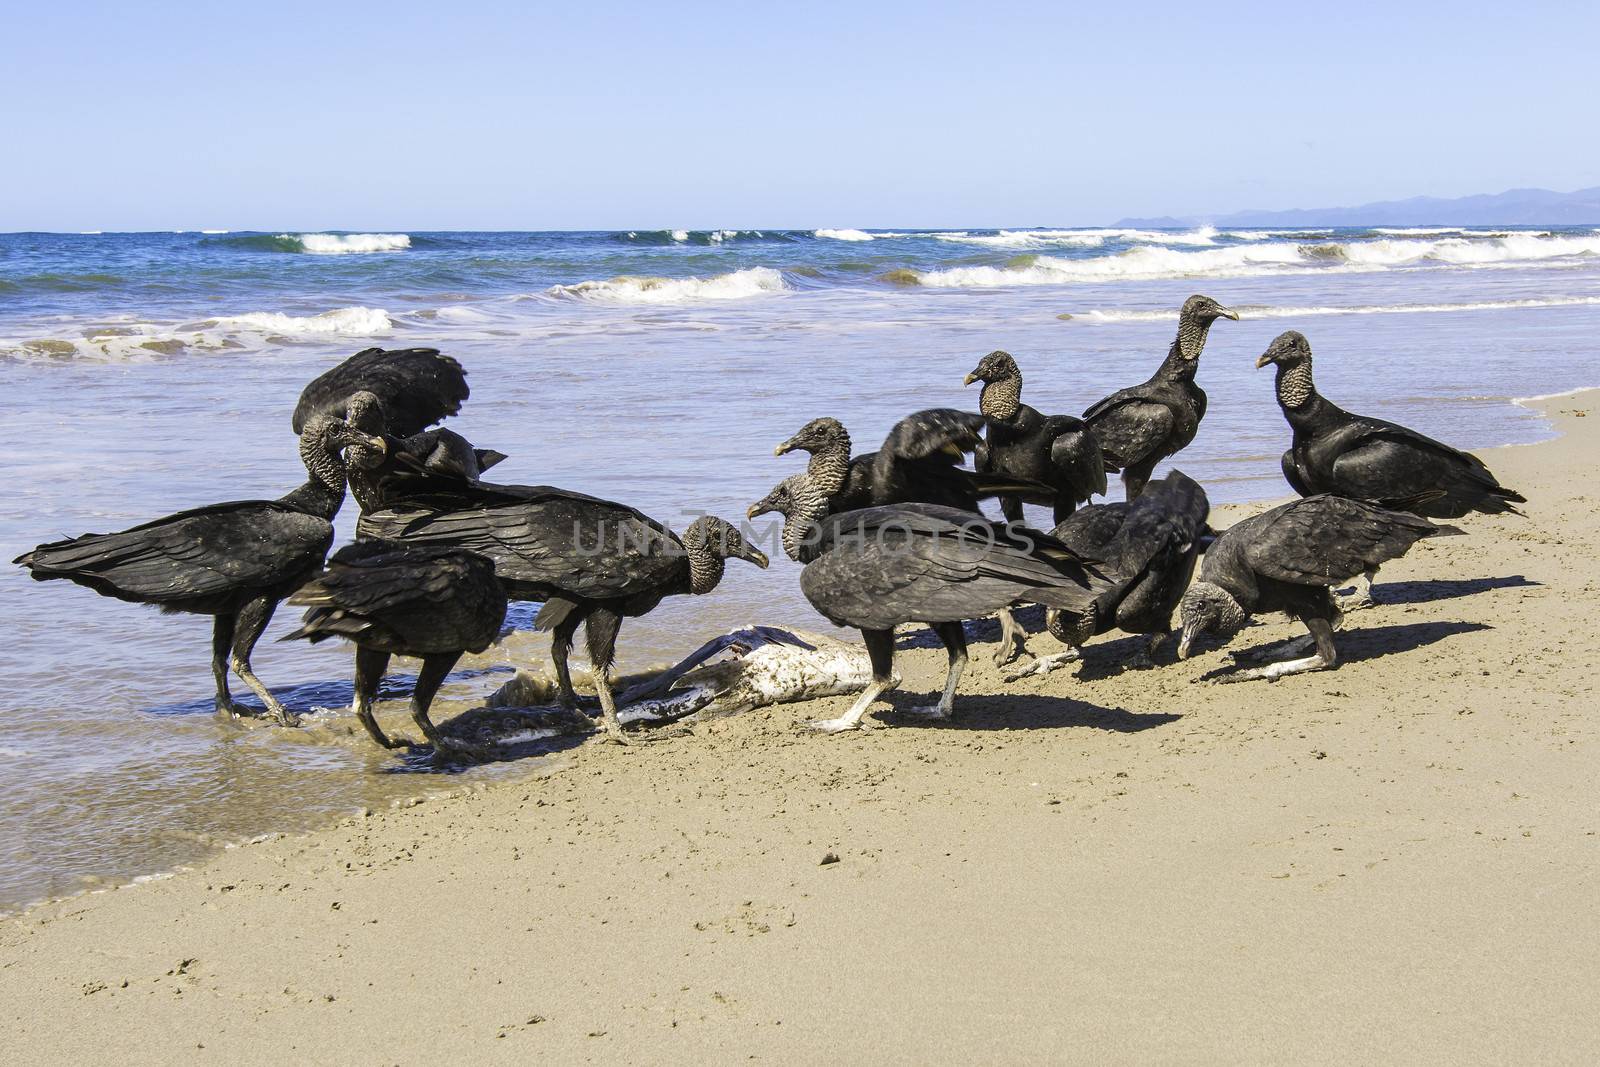 A group of black vultures pick the carcass of a dead fish clean on a beach in Costa Rica.